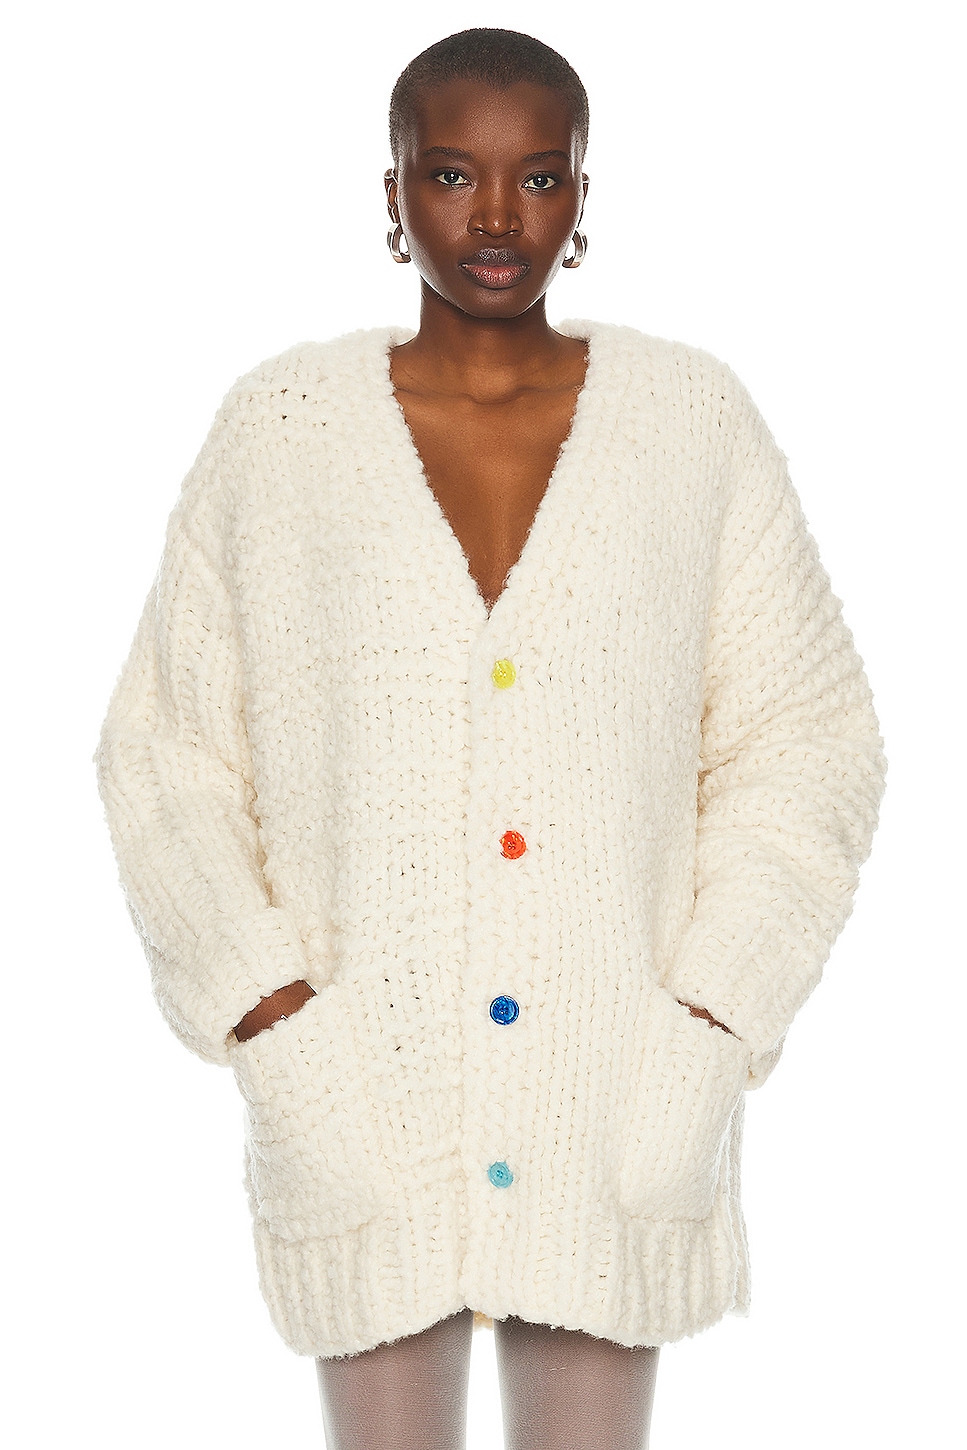 Giant Handknit Cardigan Sweater in Ivory